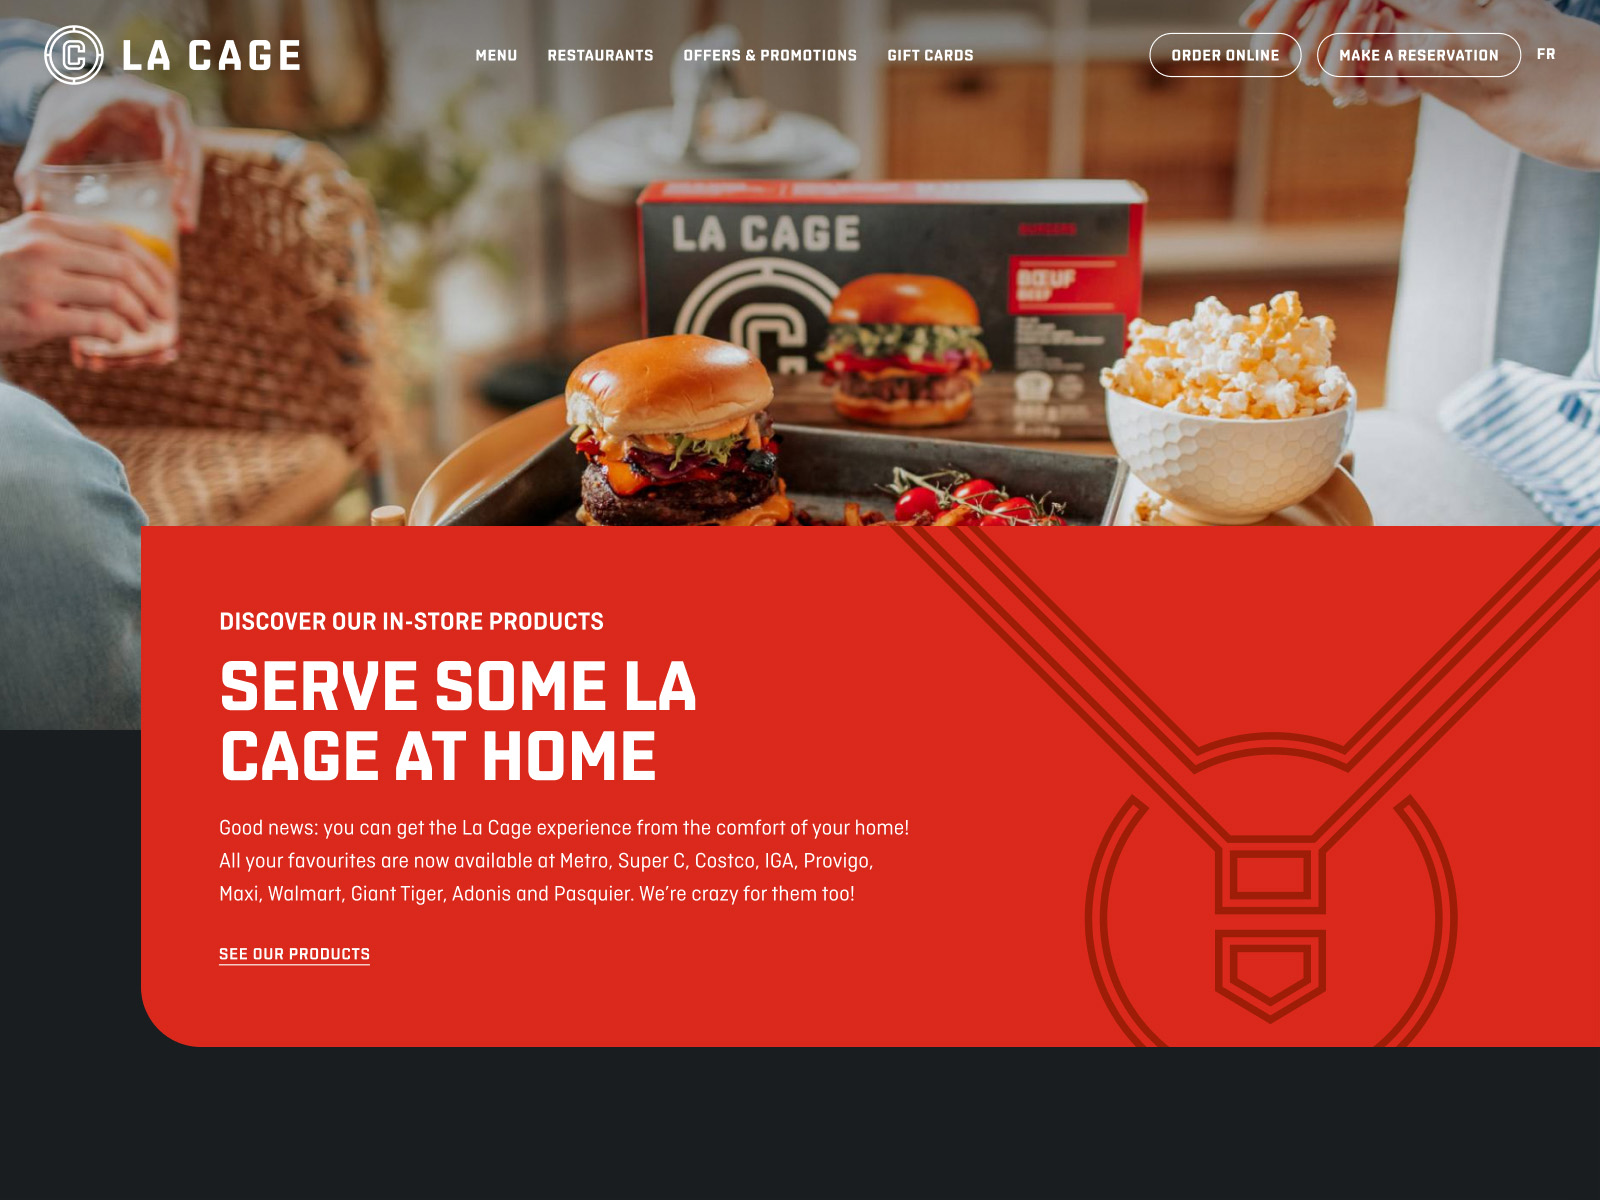 Content Pages: From Web to Plate